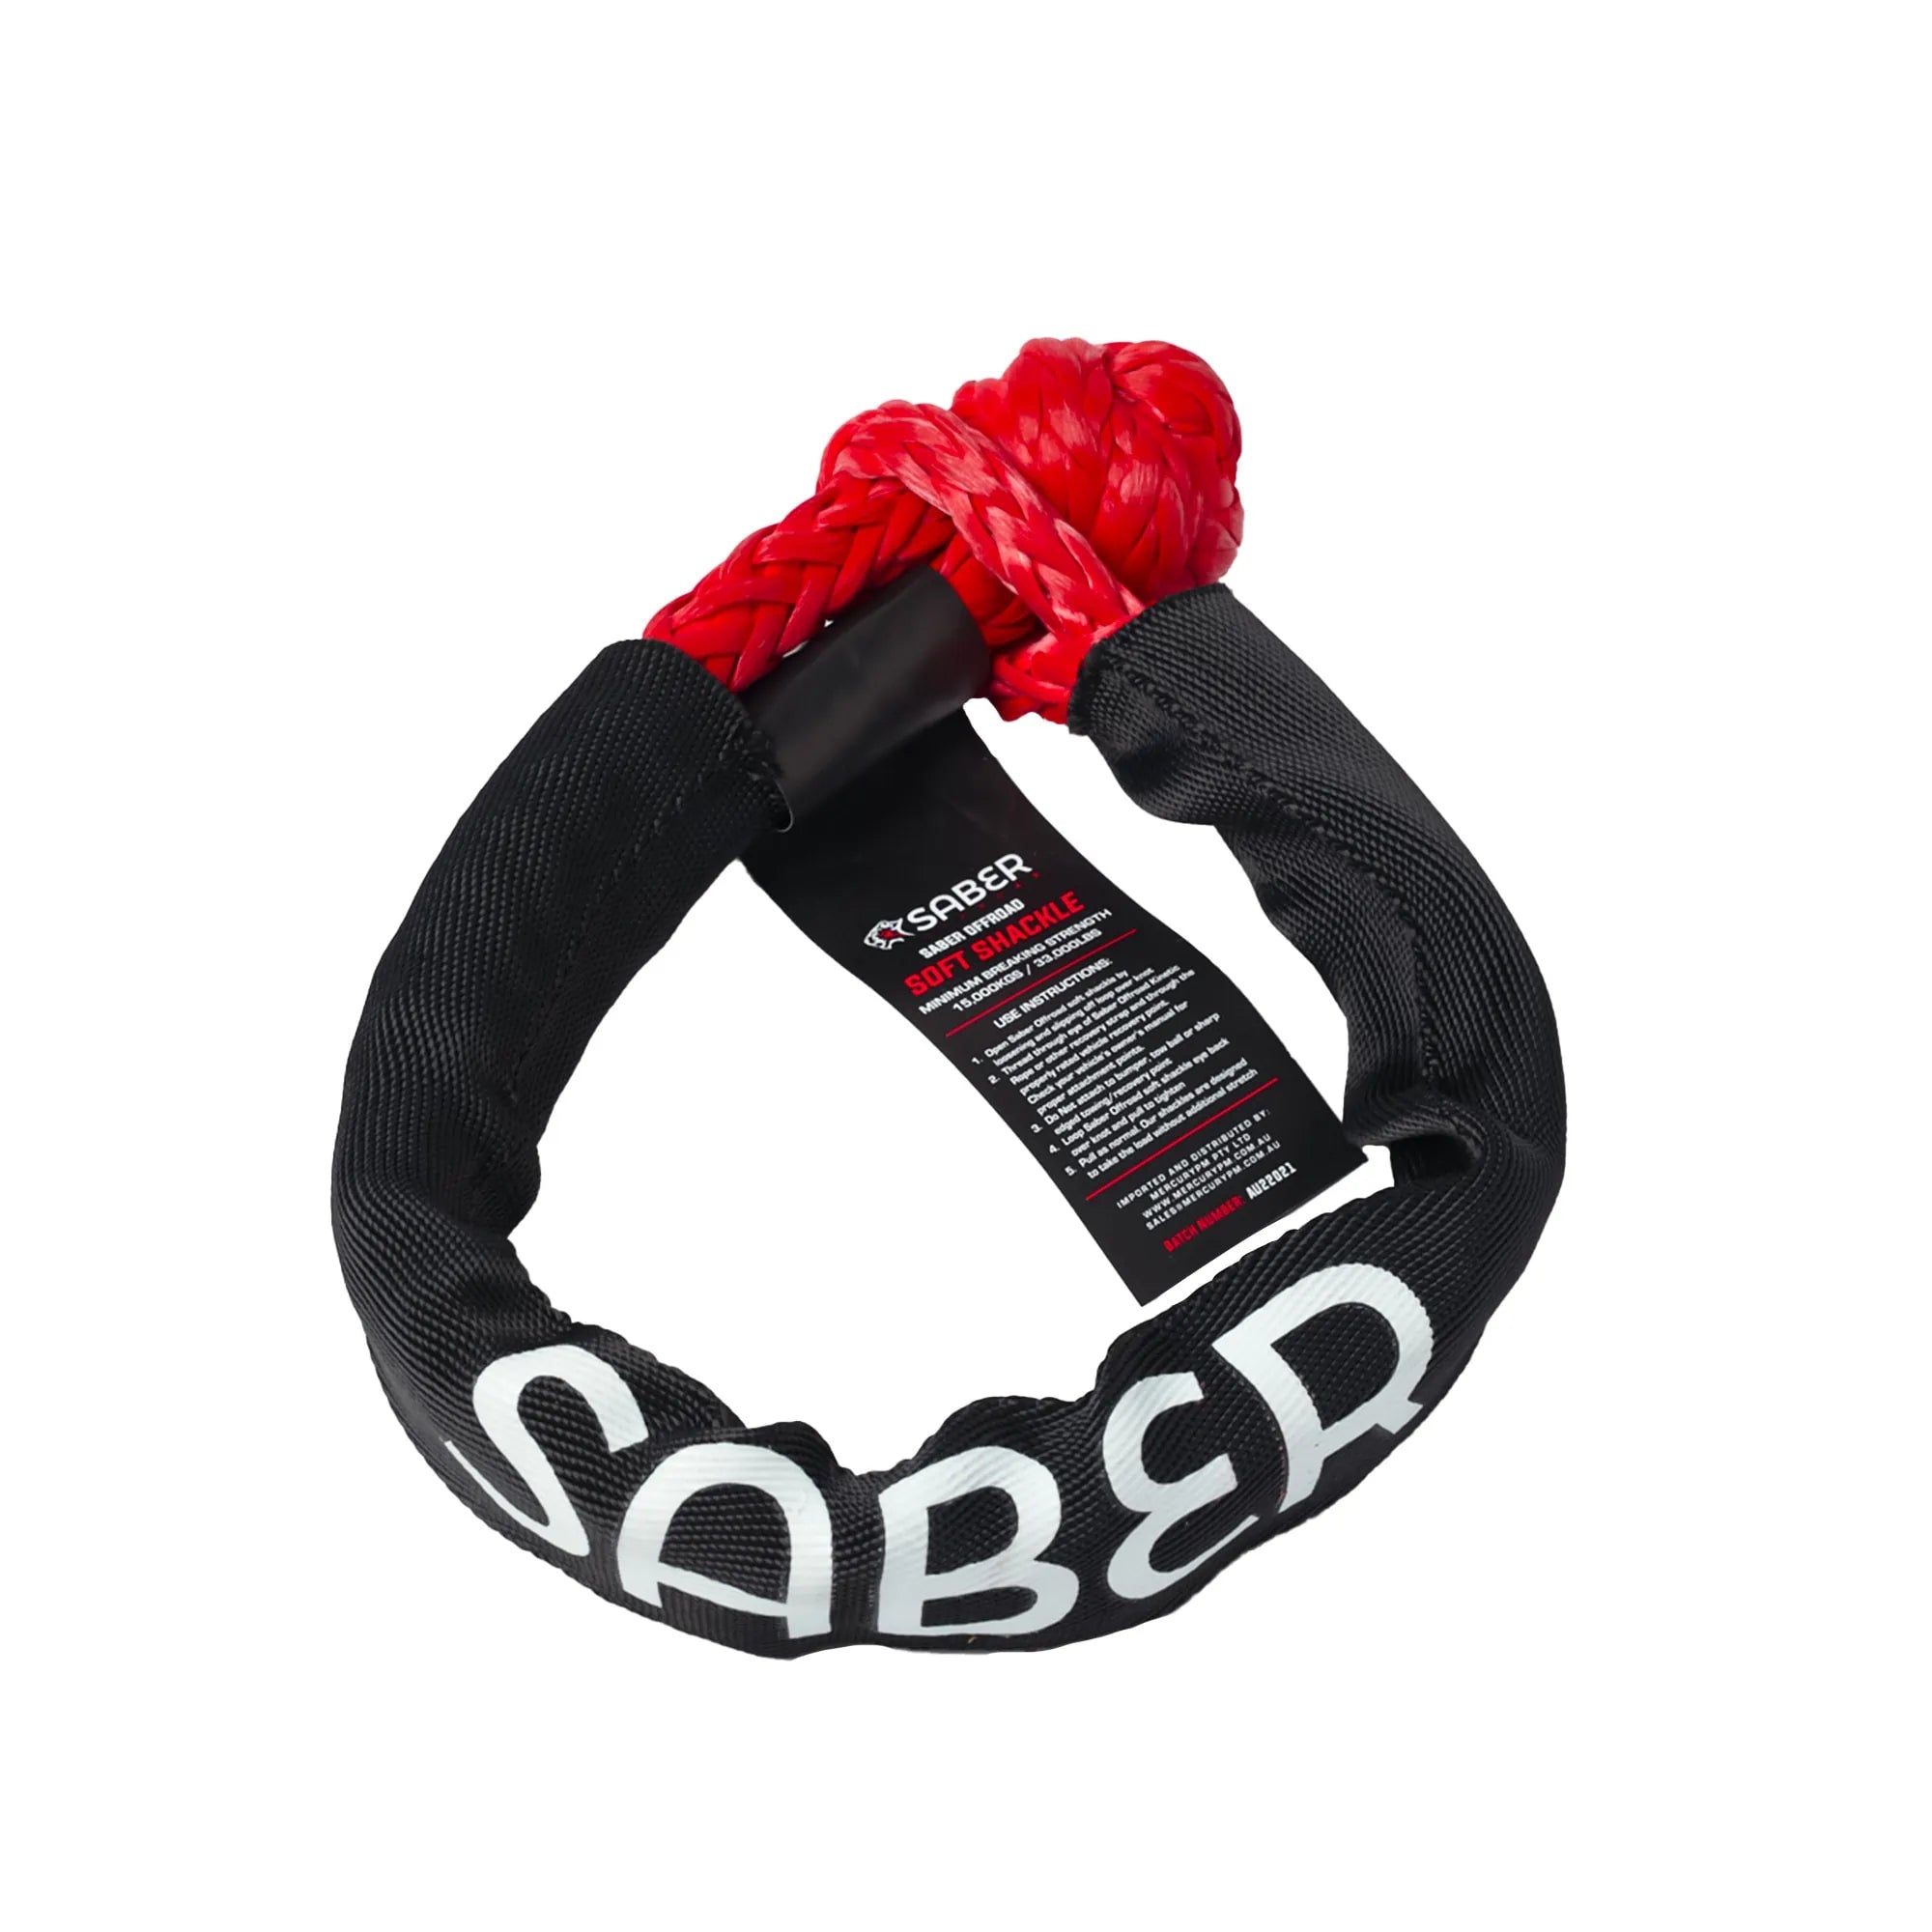 Saber Offroad 15,000kg Soft Shackle with Protective Sheath